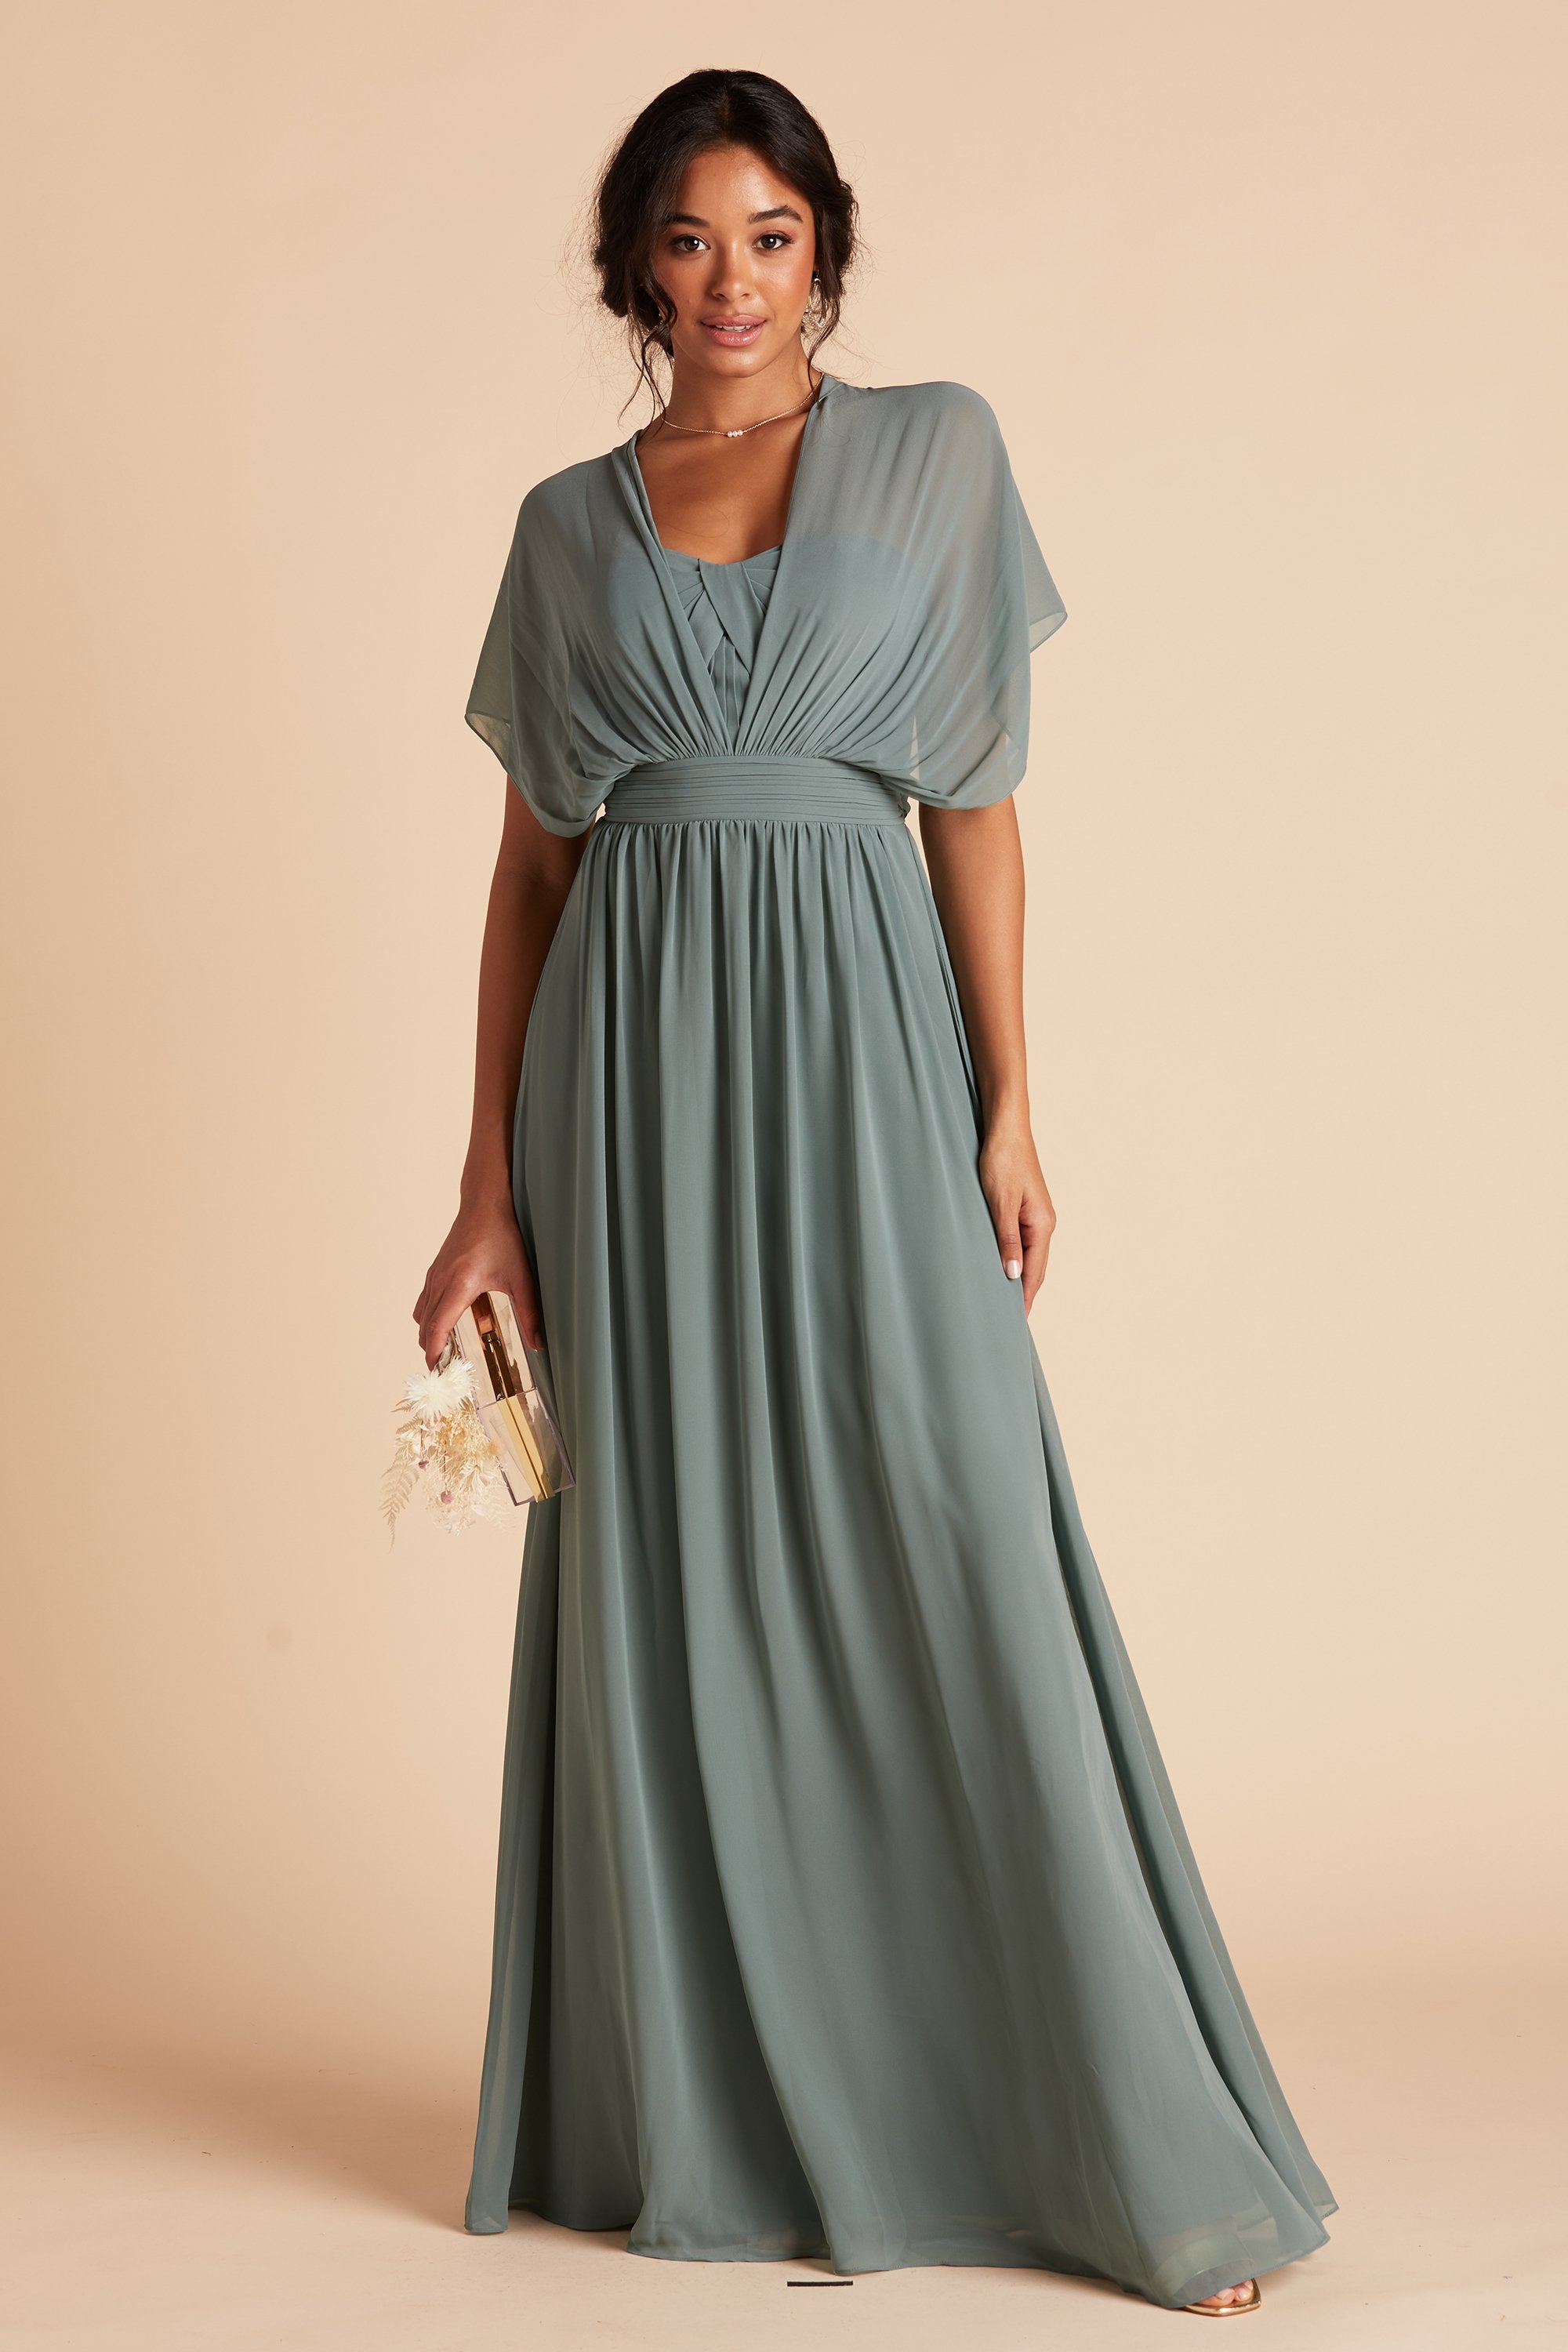 Front view of the Grace Convertible Dress in sea glass chiffon with the front streamers pulled over each shoulder and draped loosely around the model’s arms, creating a butterfly sleeve look.